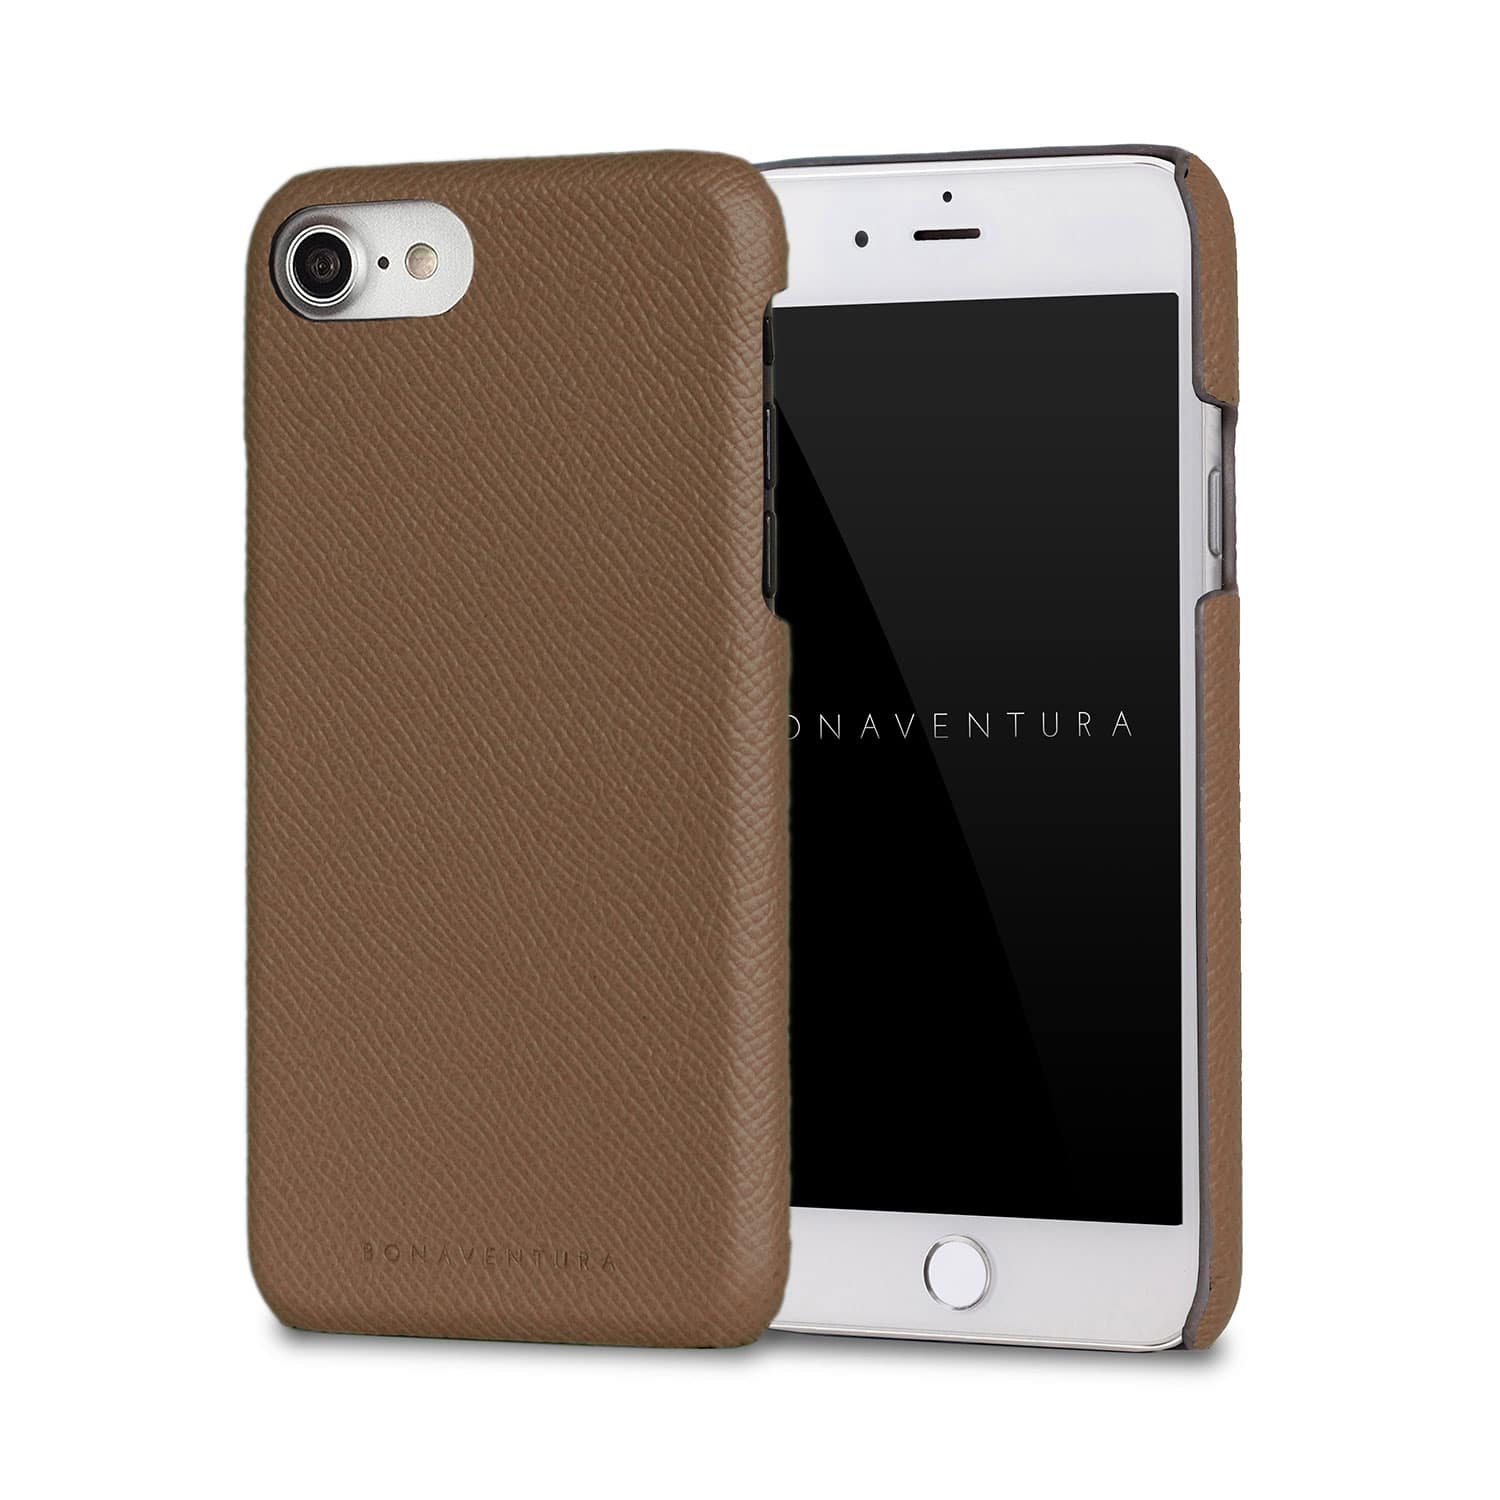 (iPhone SE / 8 / 7 / 6s / 6) Back Cover Case Noblesse Leather